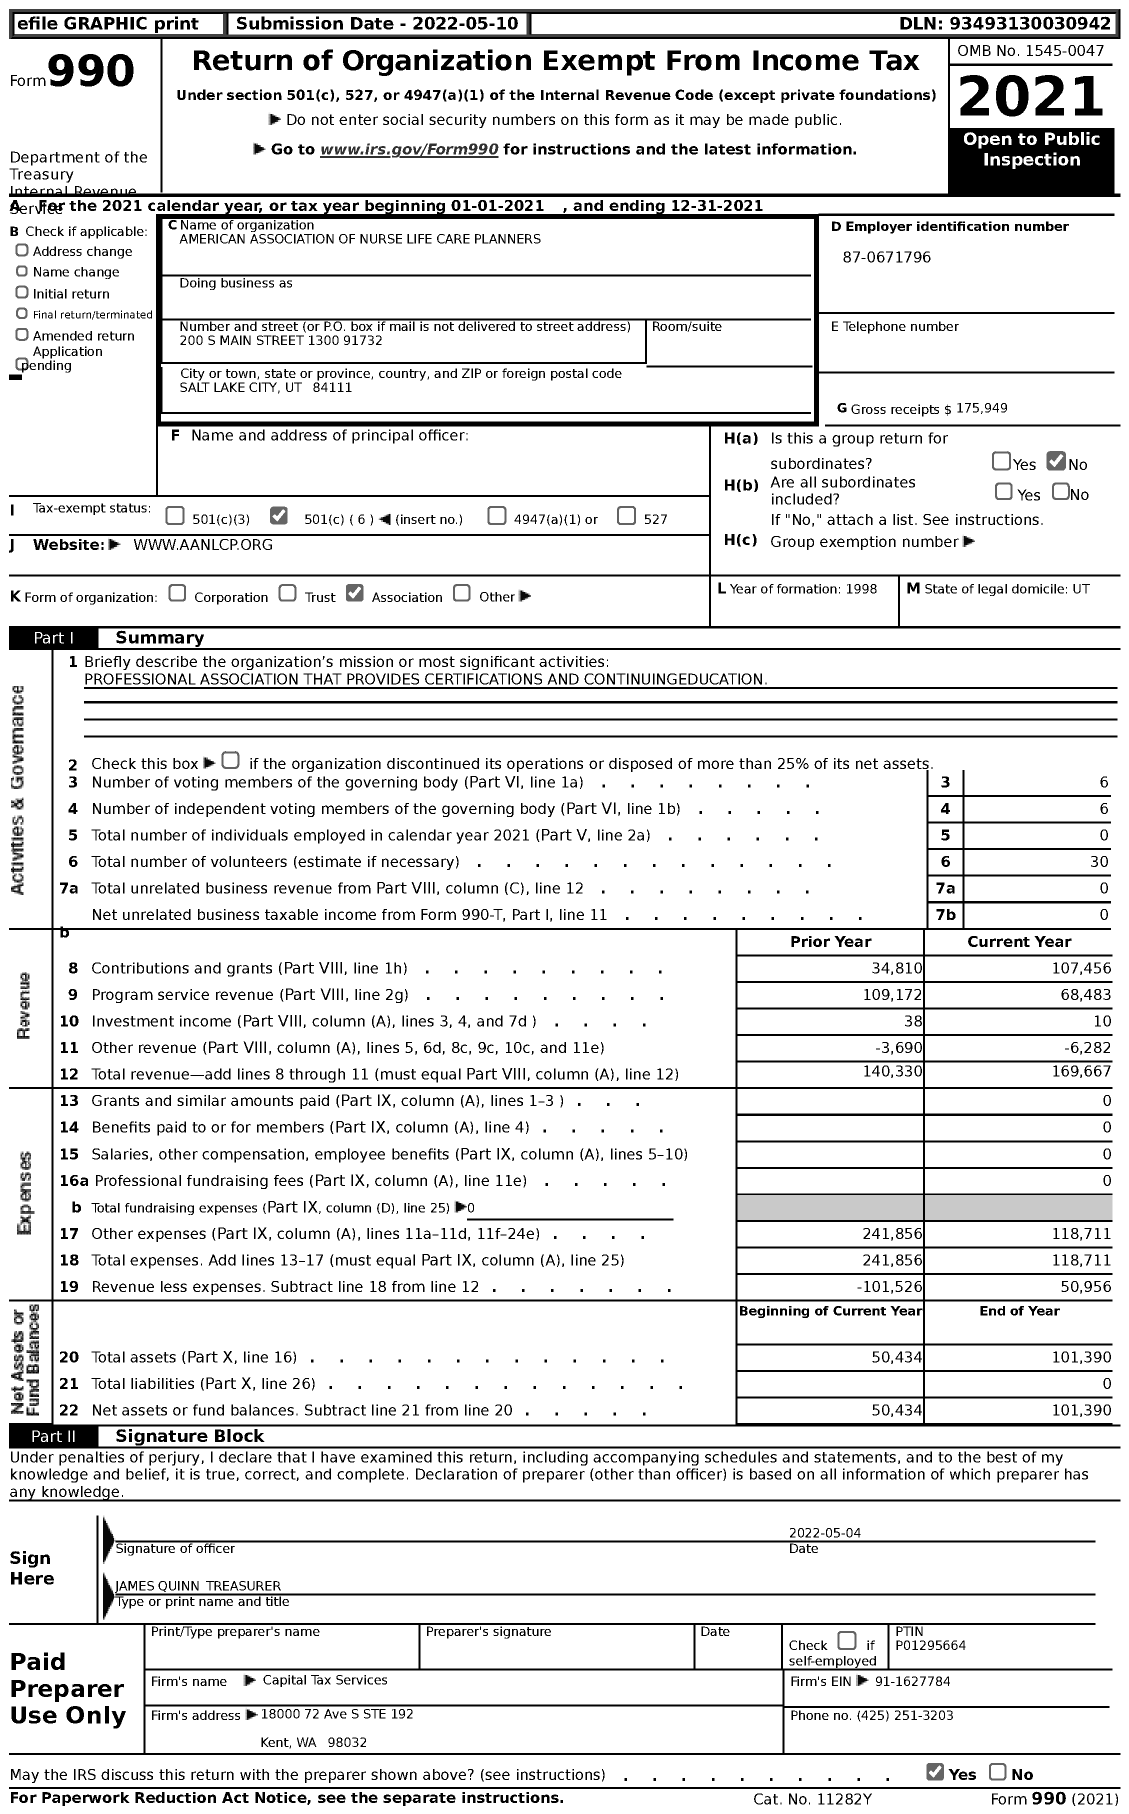 Image of first page of 2021 Form 990 for American Association of Nurse Life Care Planners